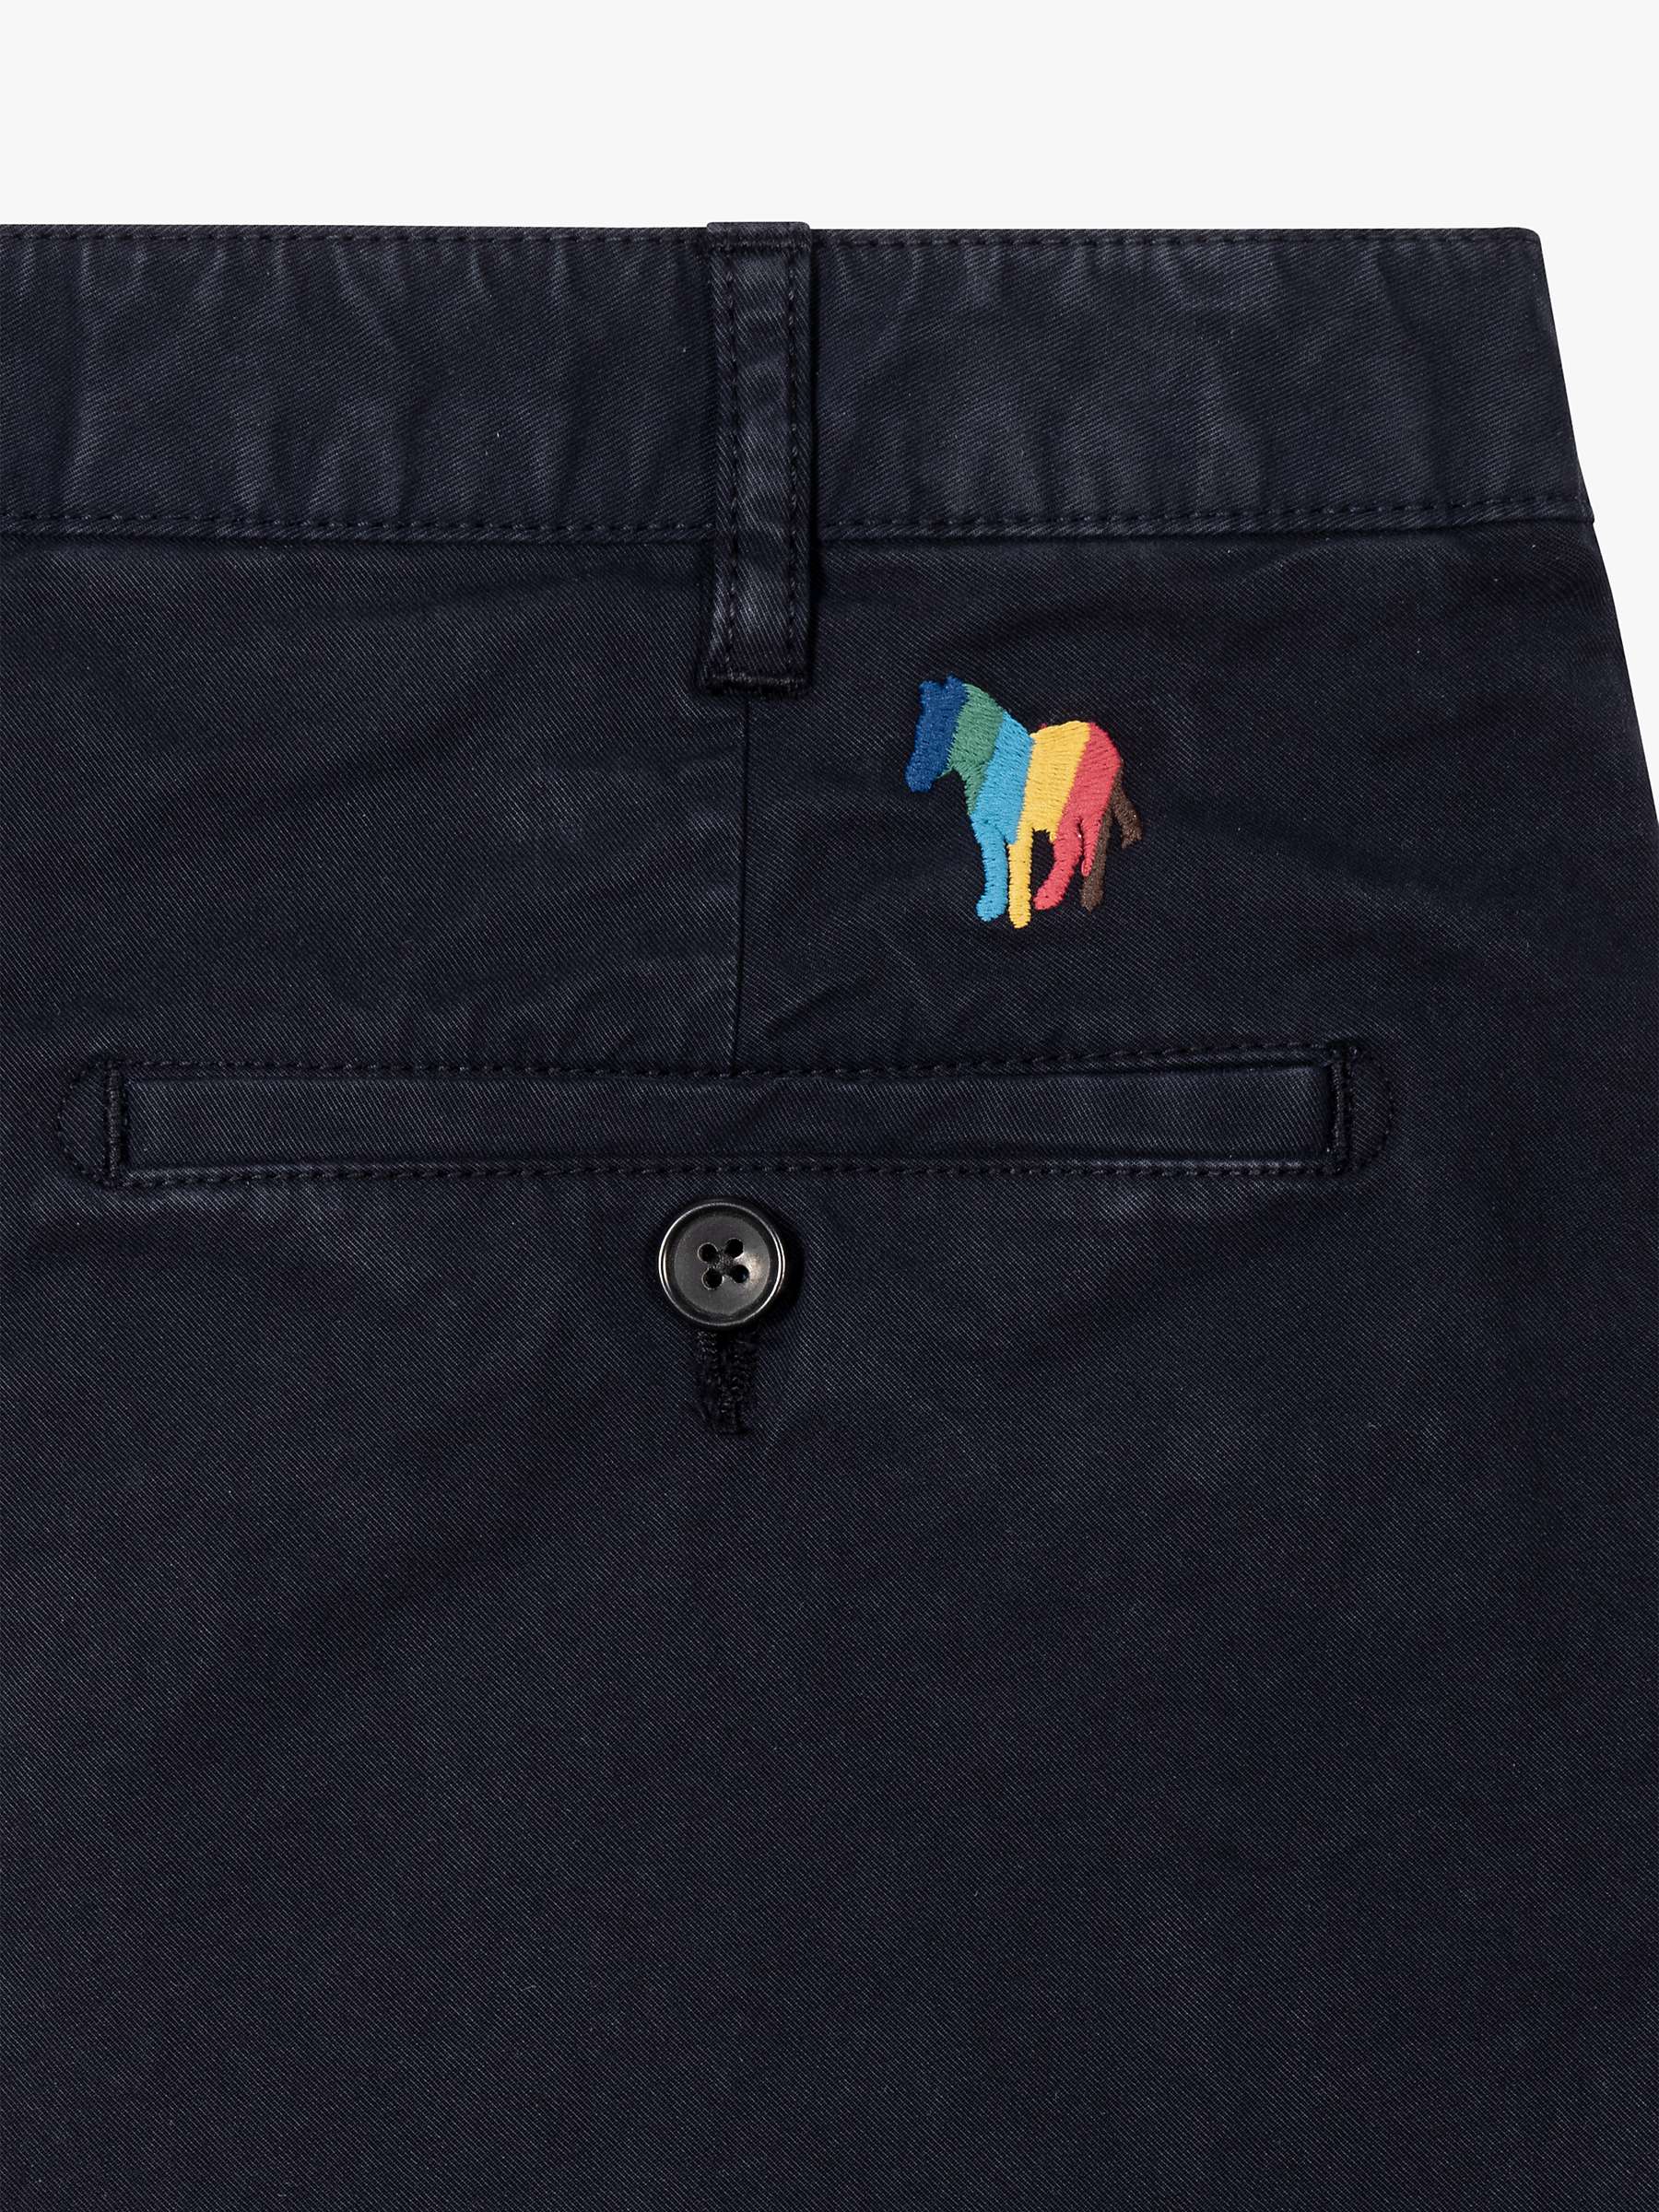 Buy PS Paul Smith Mid Clean Chino Shorts, Blue Online at johnlewis.com